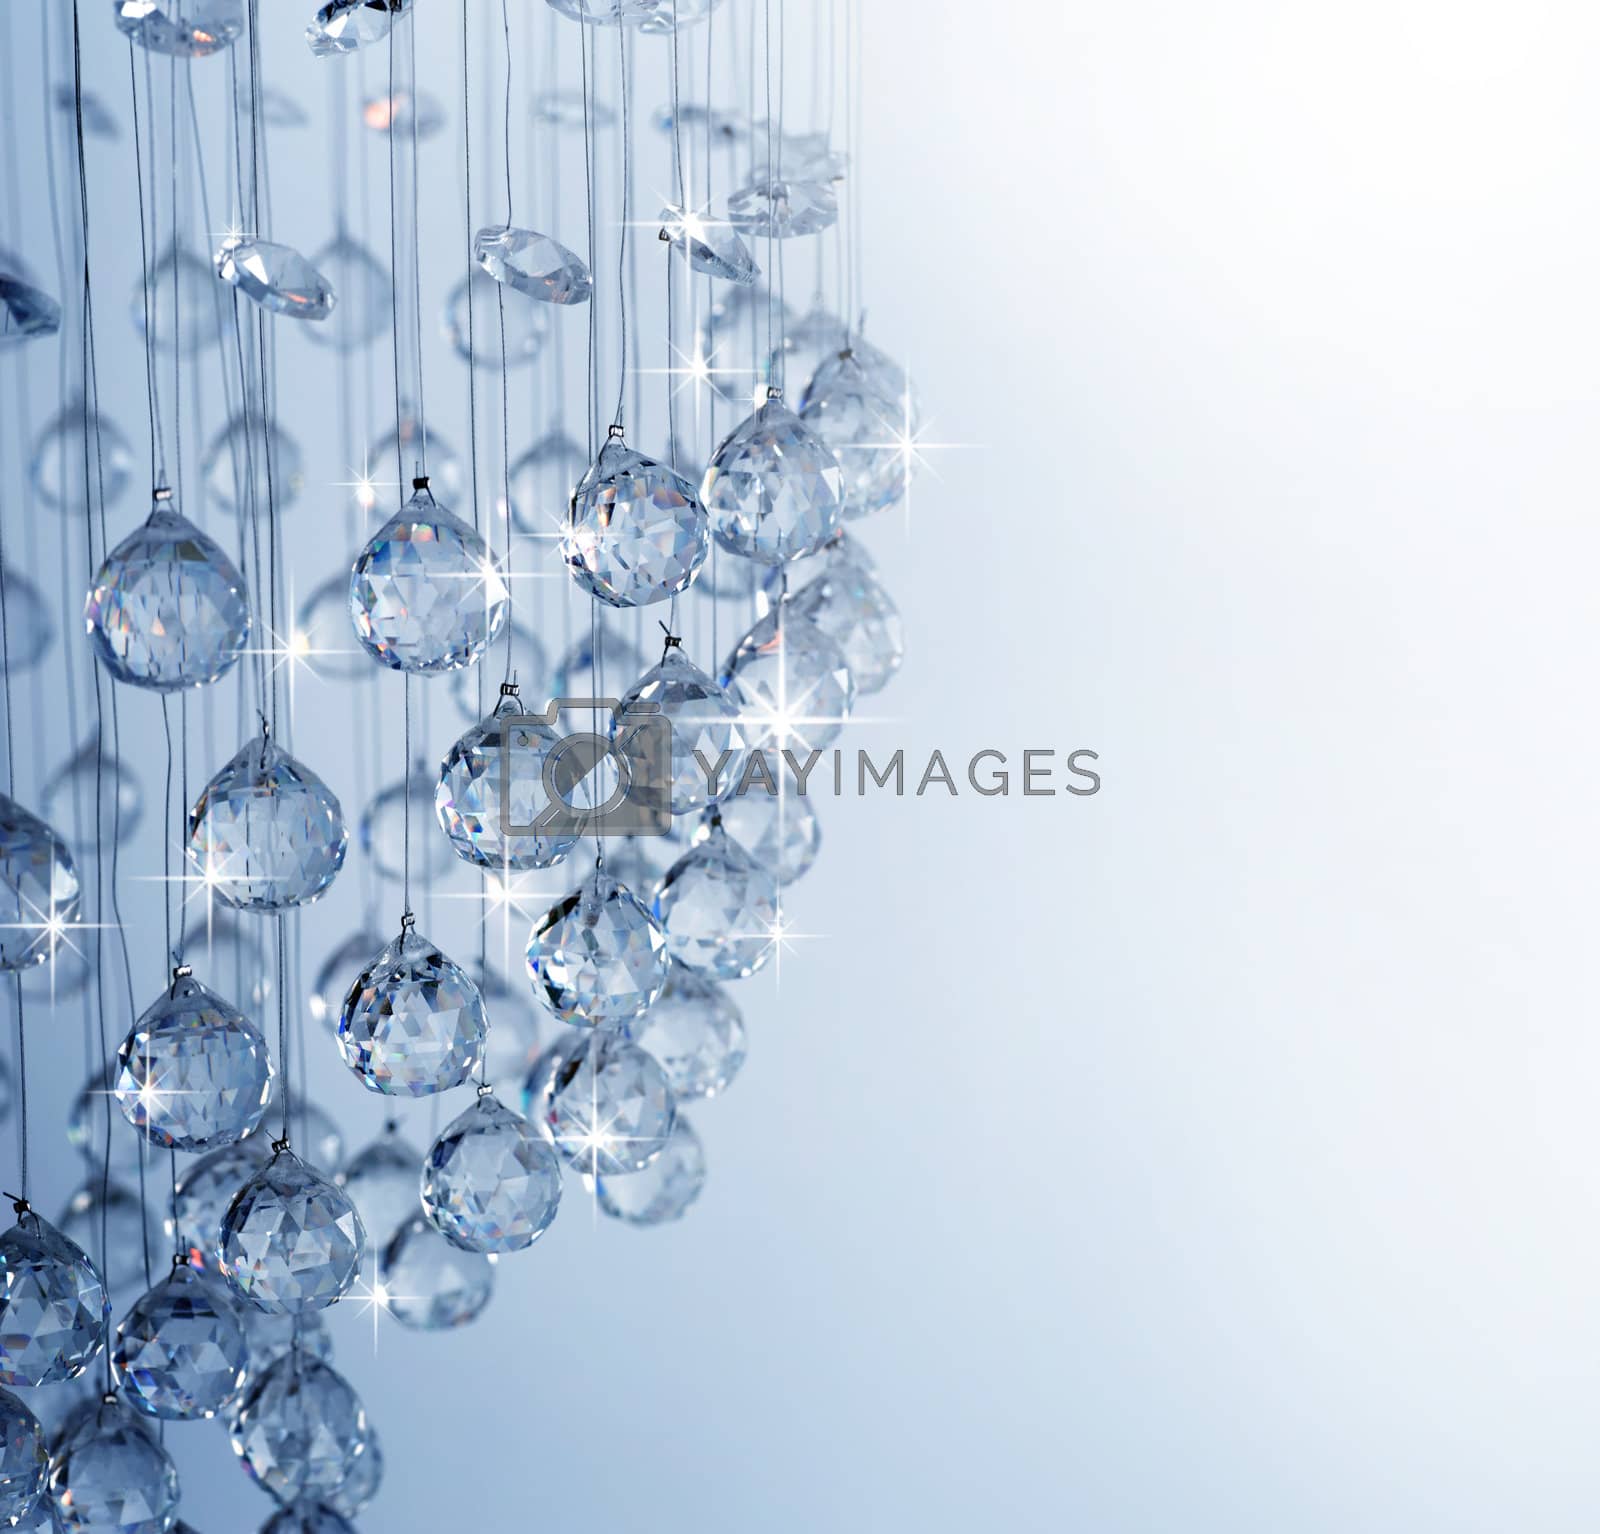 Royalty free image of Crystal Of Modern Chandelier  by SubbotinaA